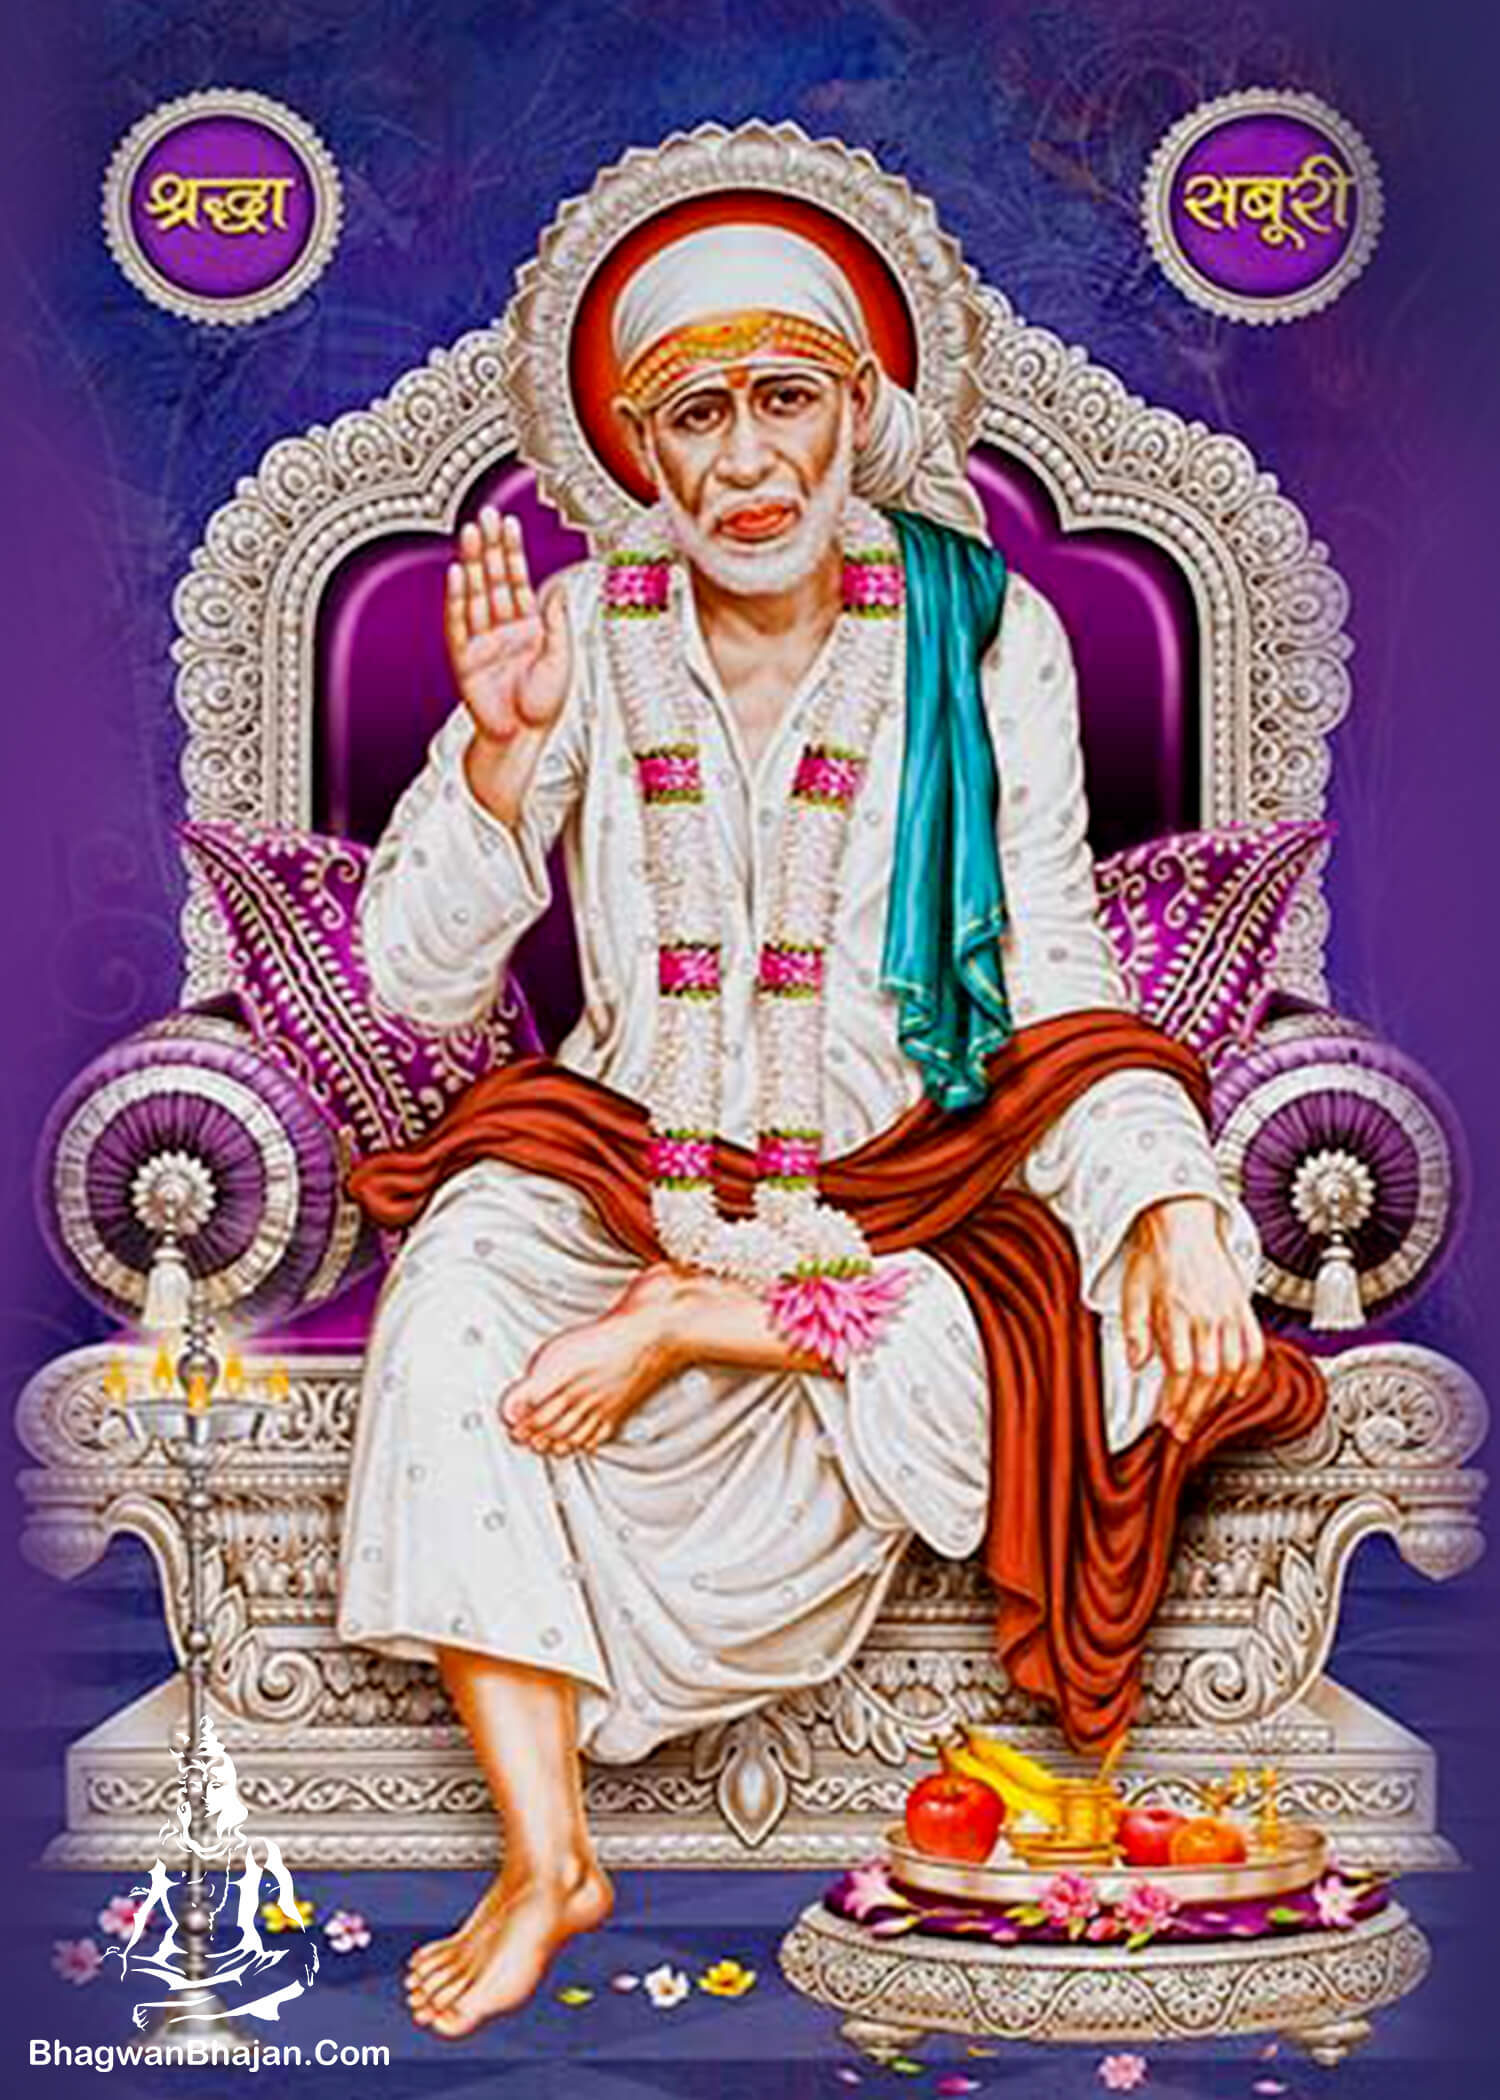 Sai Baba Live Wallpaper Apk Download for Android- Latest version 1.5-  rudrabestapps.saibabalivewallpaper